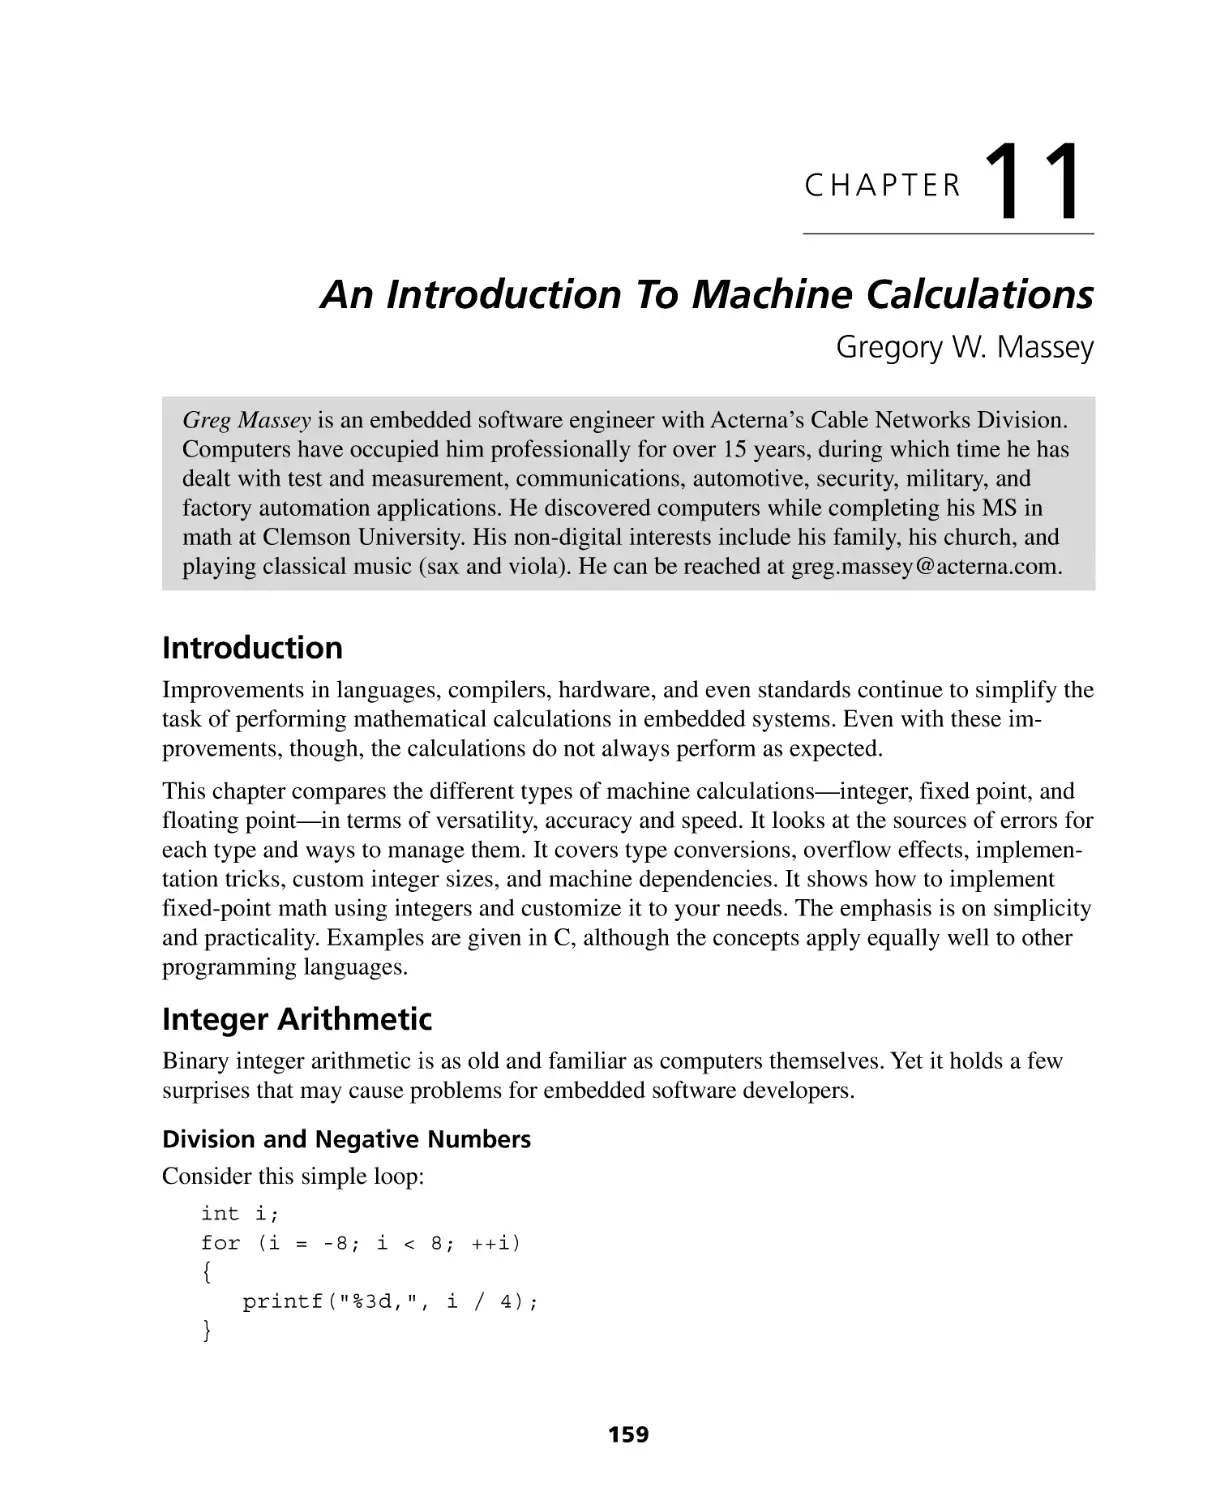 Chapter 11
Introduction
Integer Arithmetic